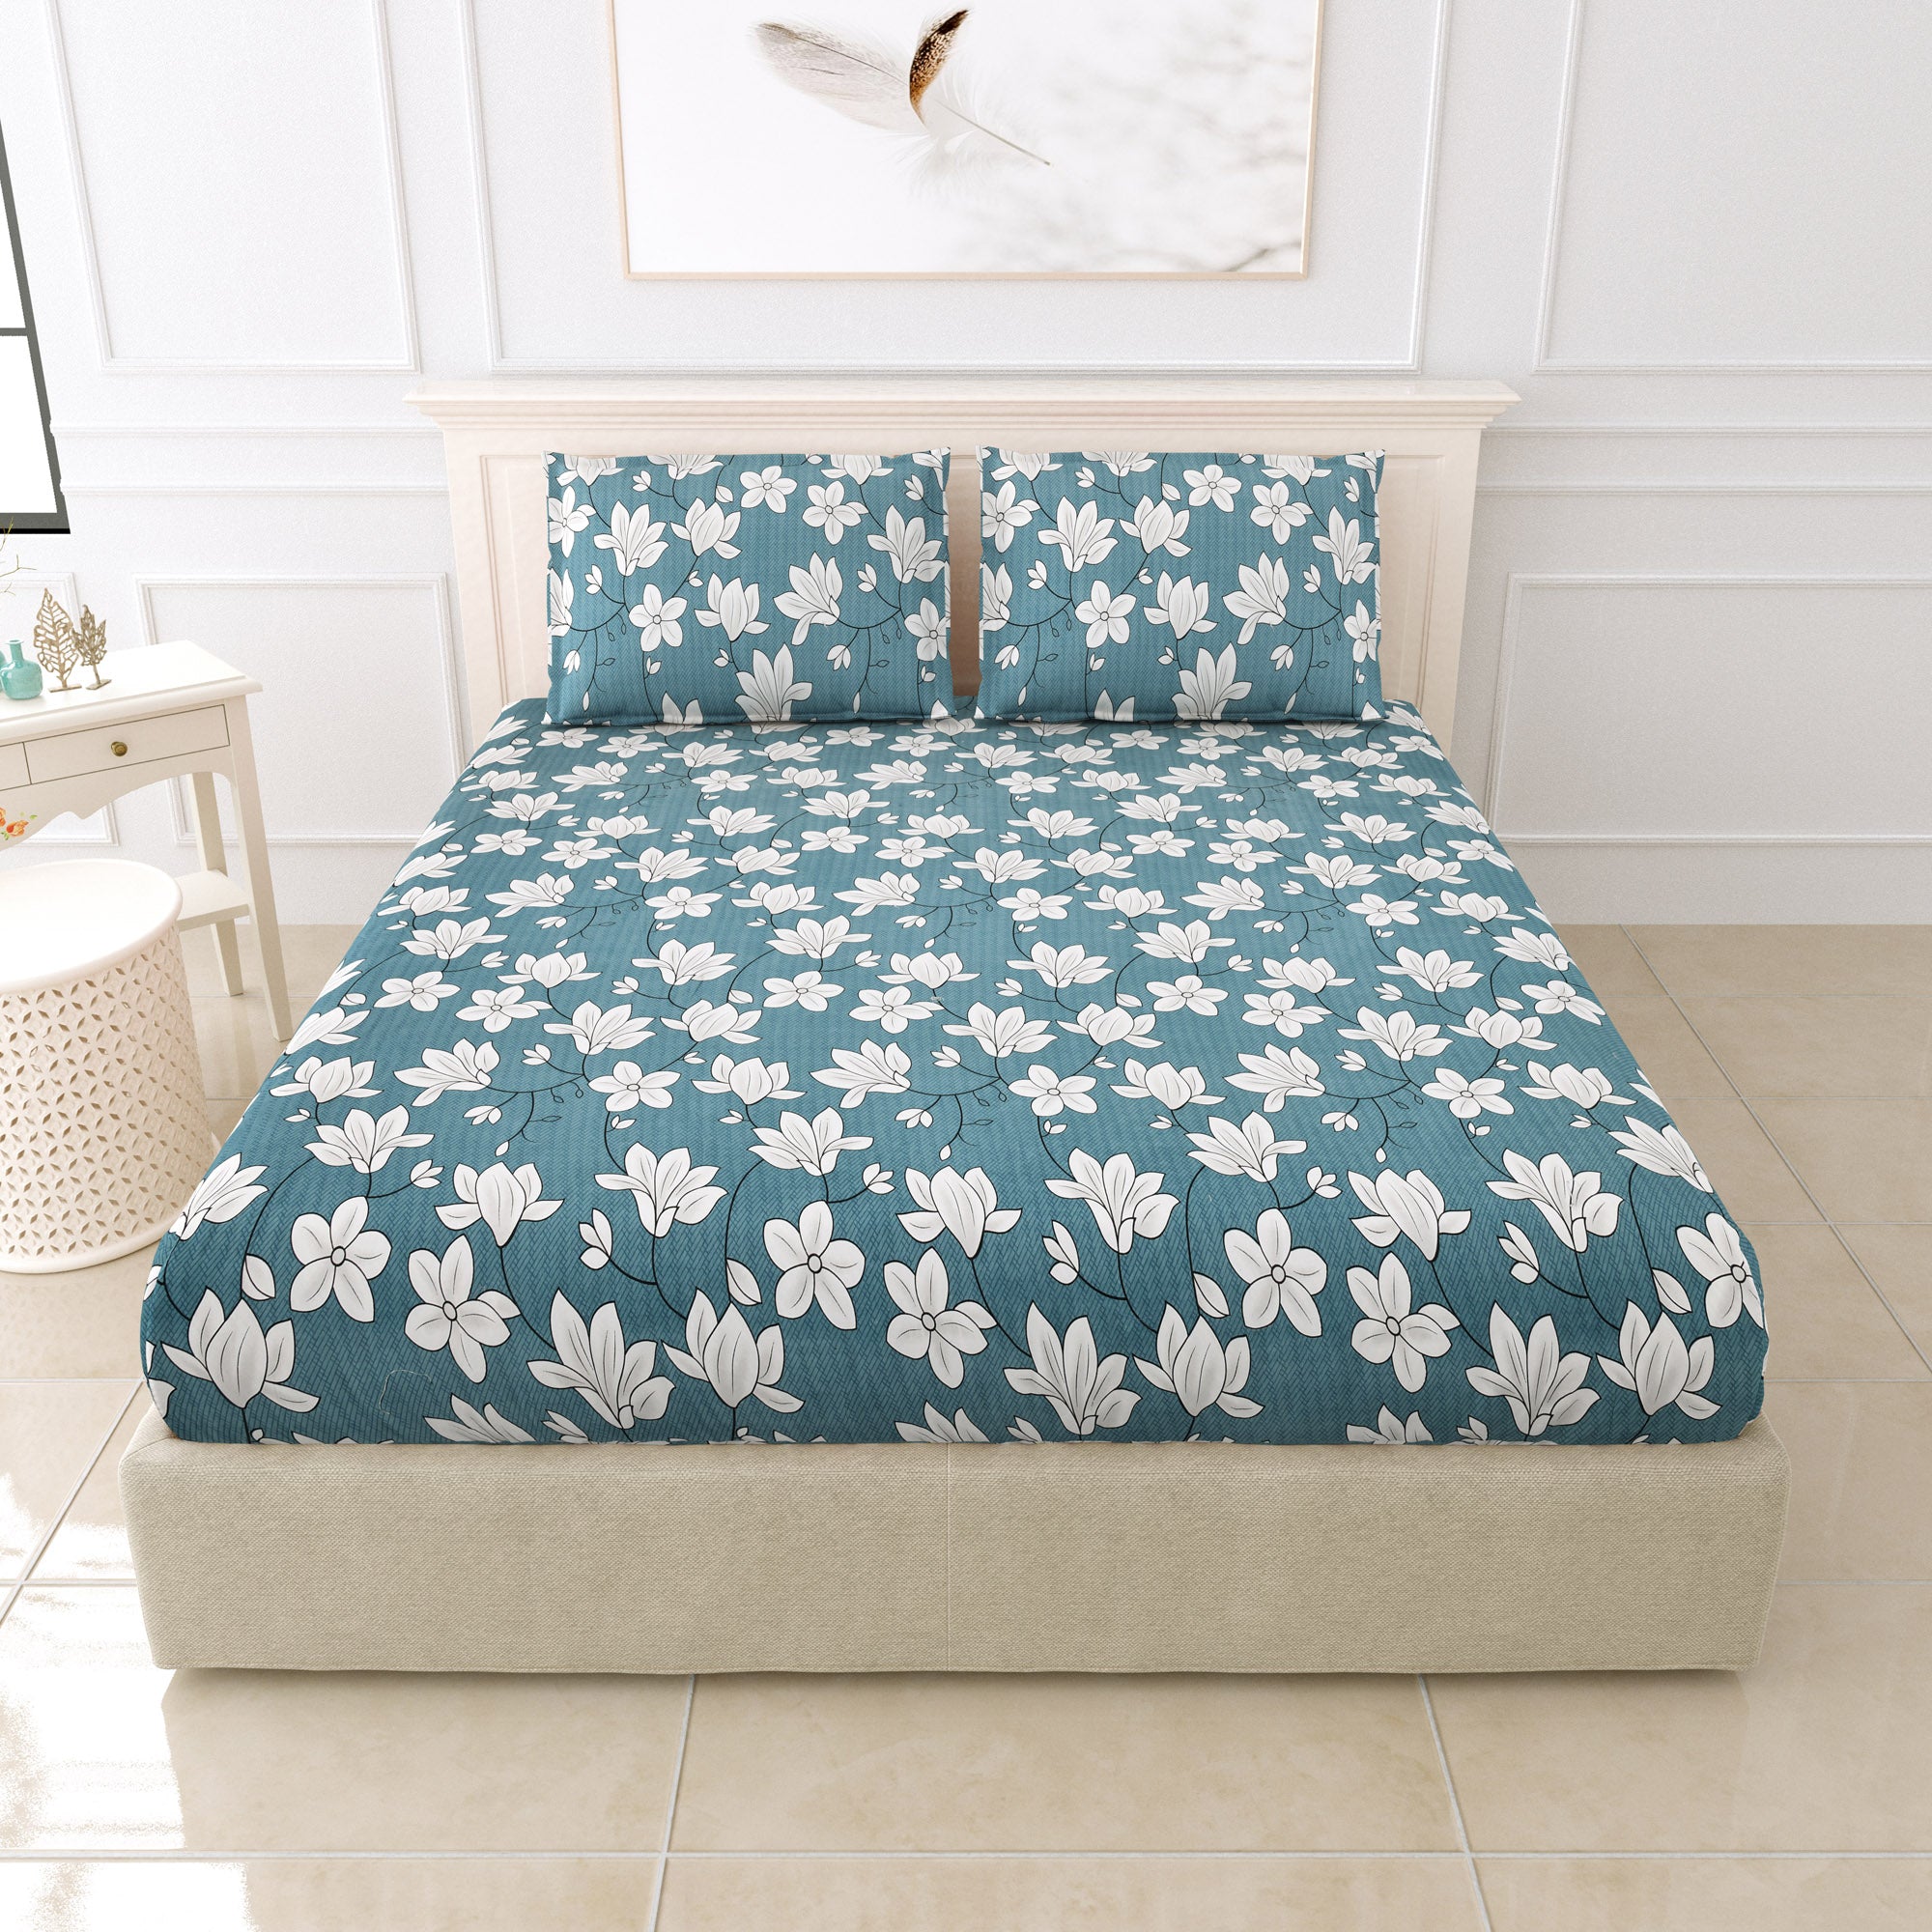 eCraftIndia 250 TC Blue, White Flowers Printed Cotton Double Bedsheet With 2 Pillow Covers